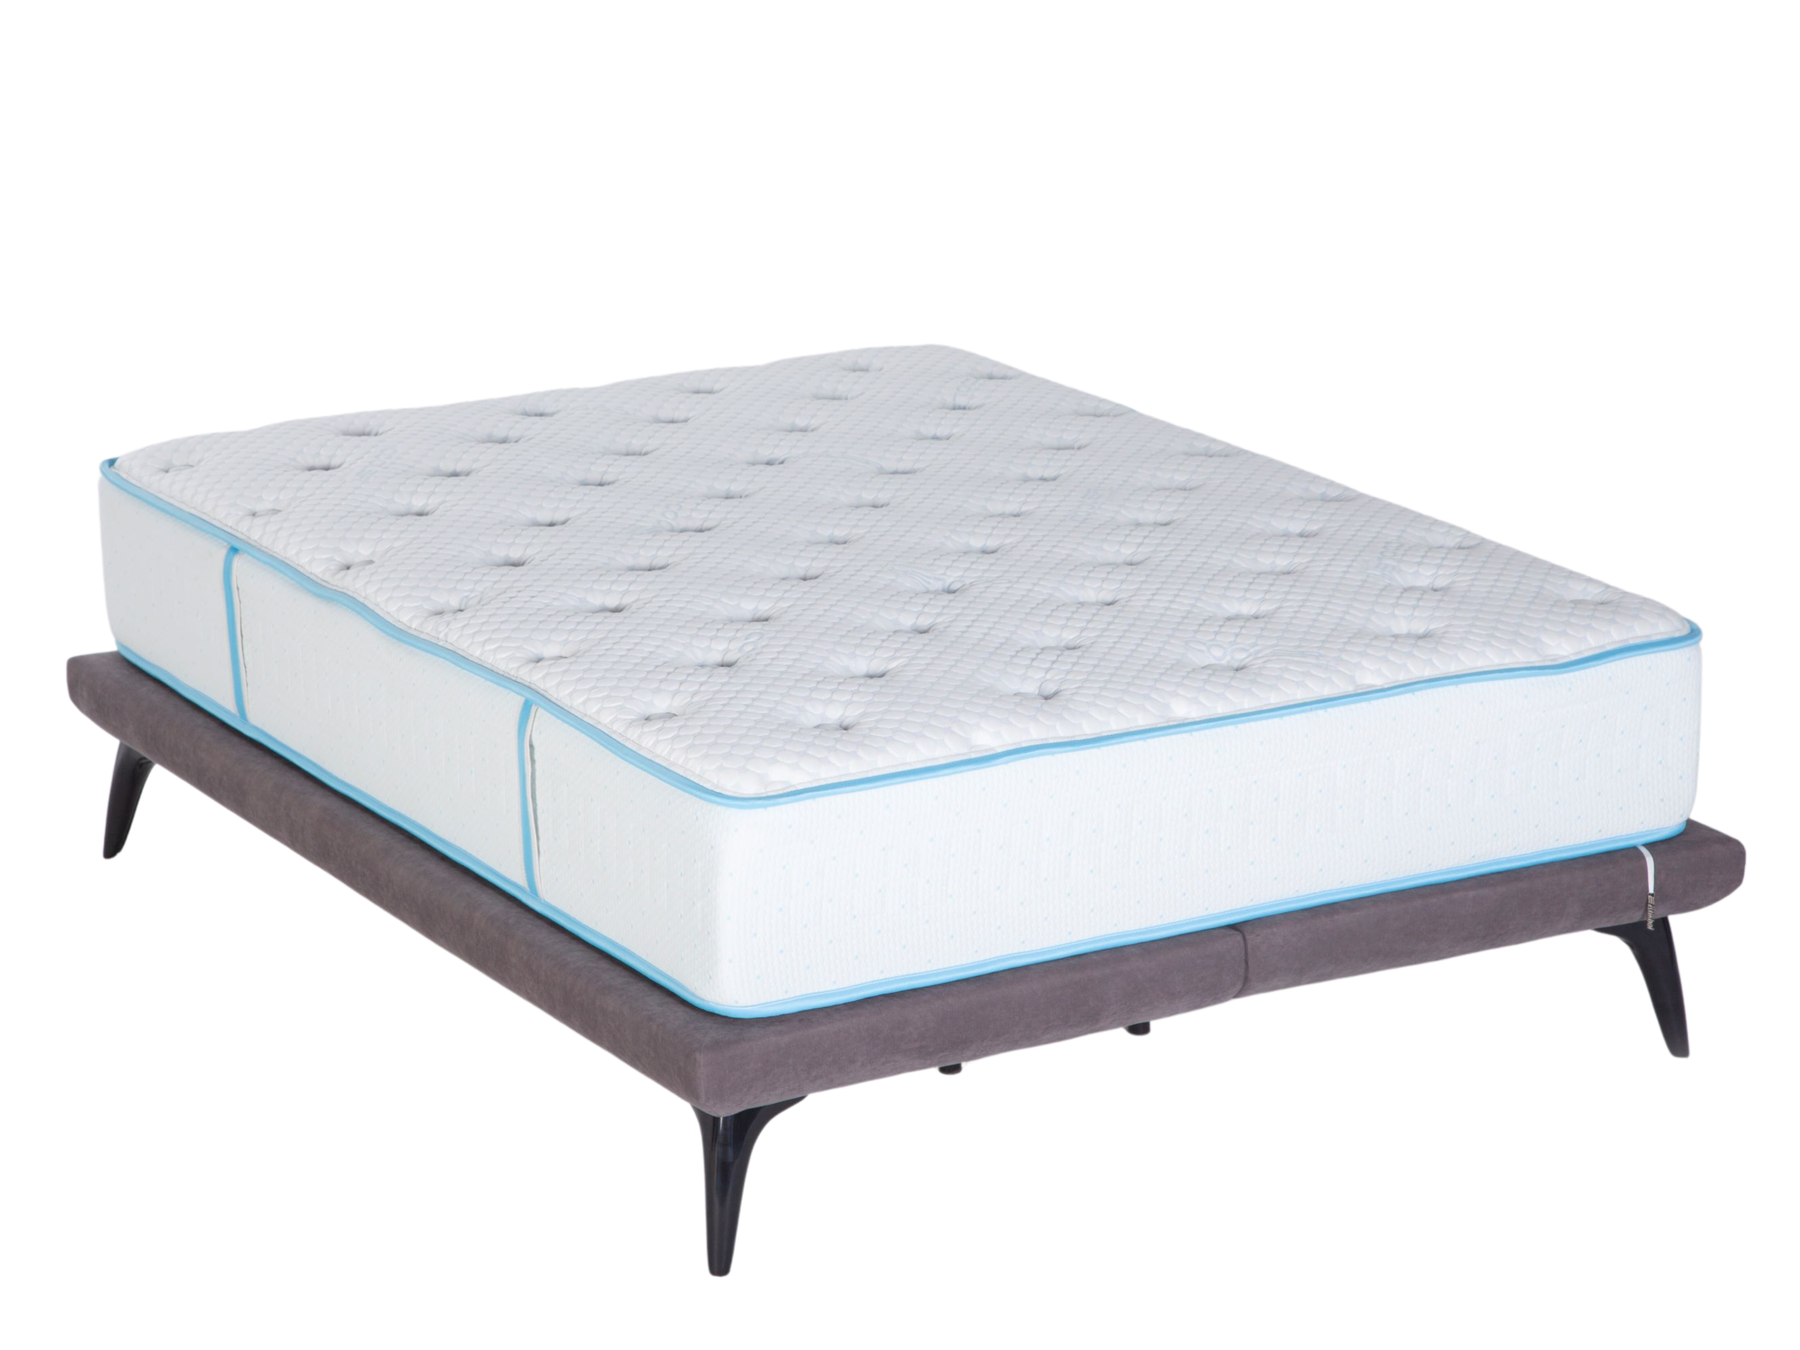 Bellona Serenity Extreme Mattress by Bellona